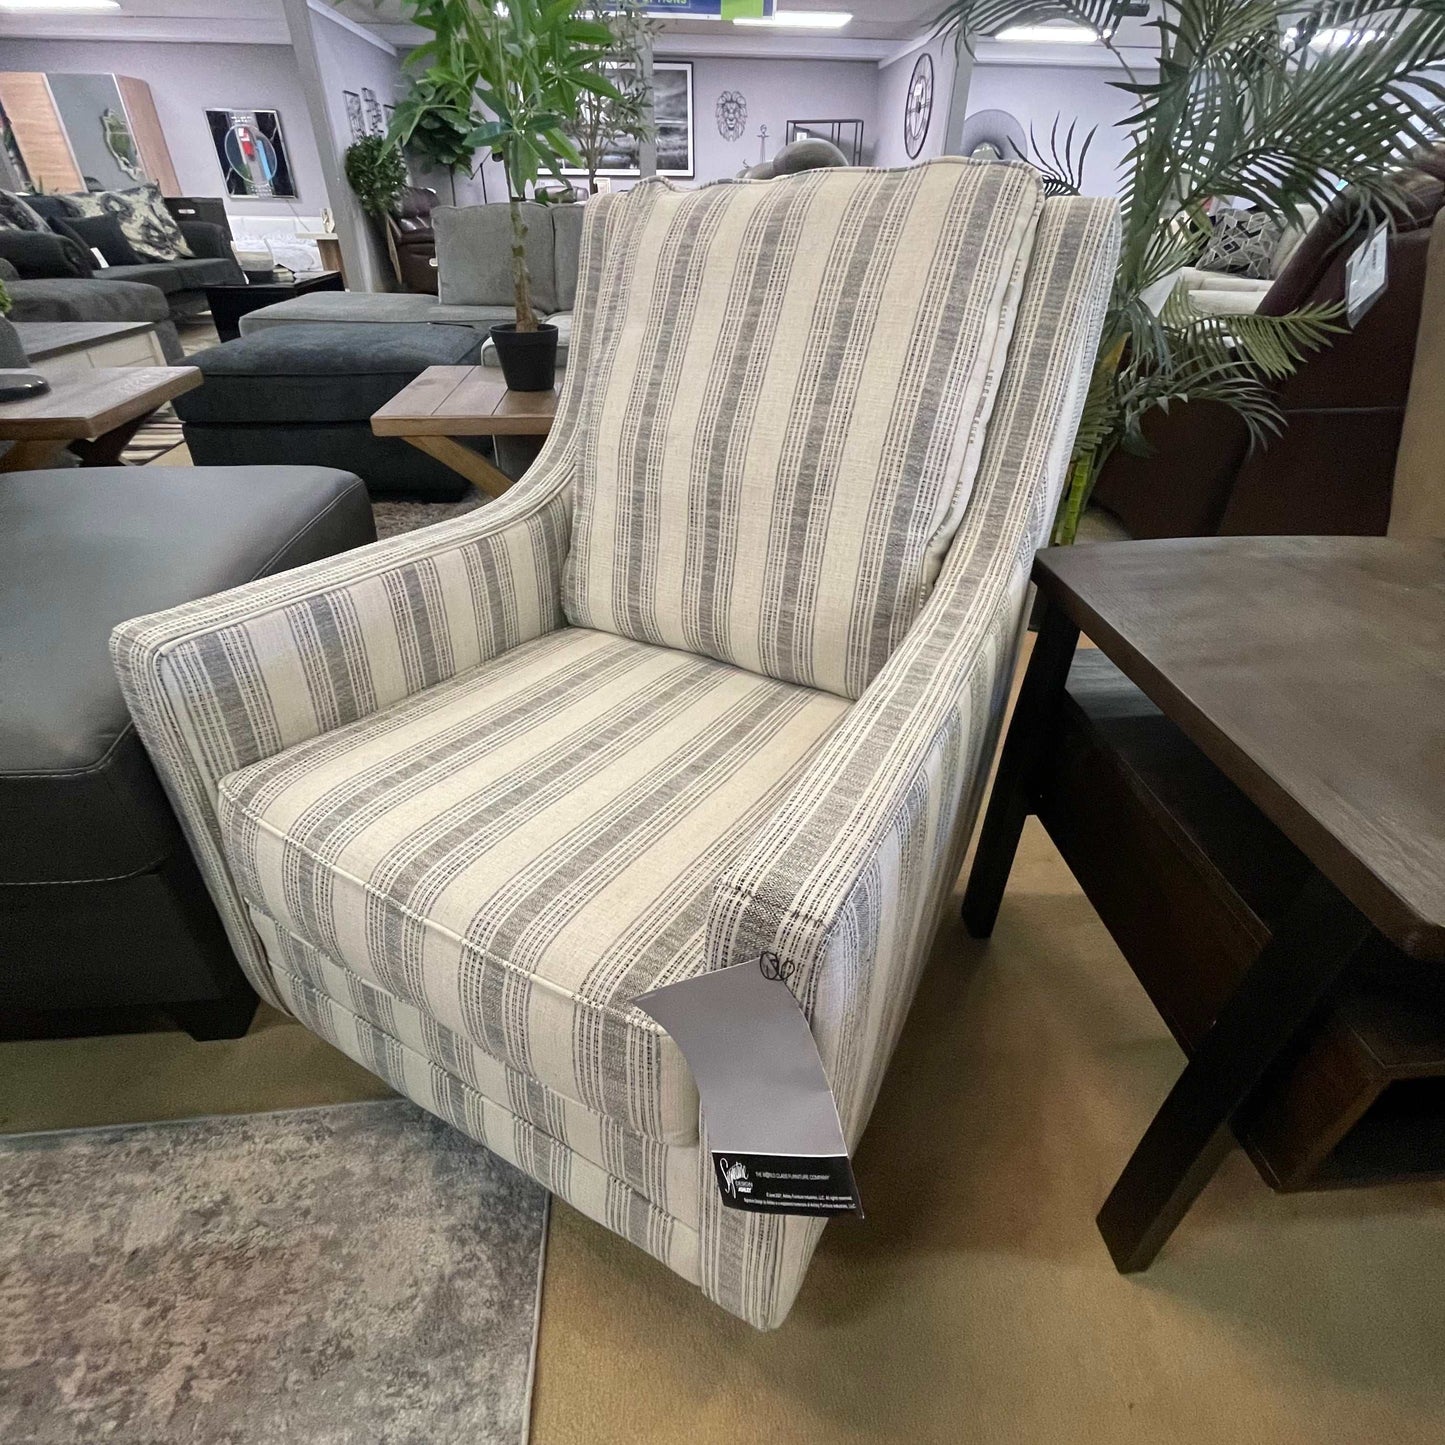 Kambria Swivel Accent Chair